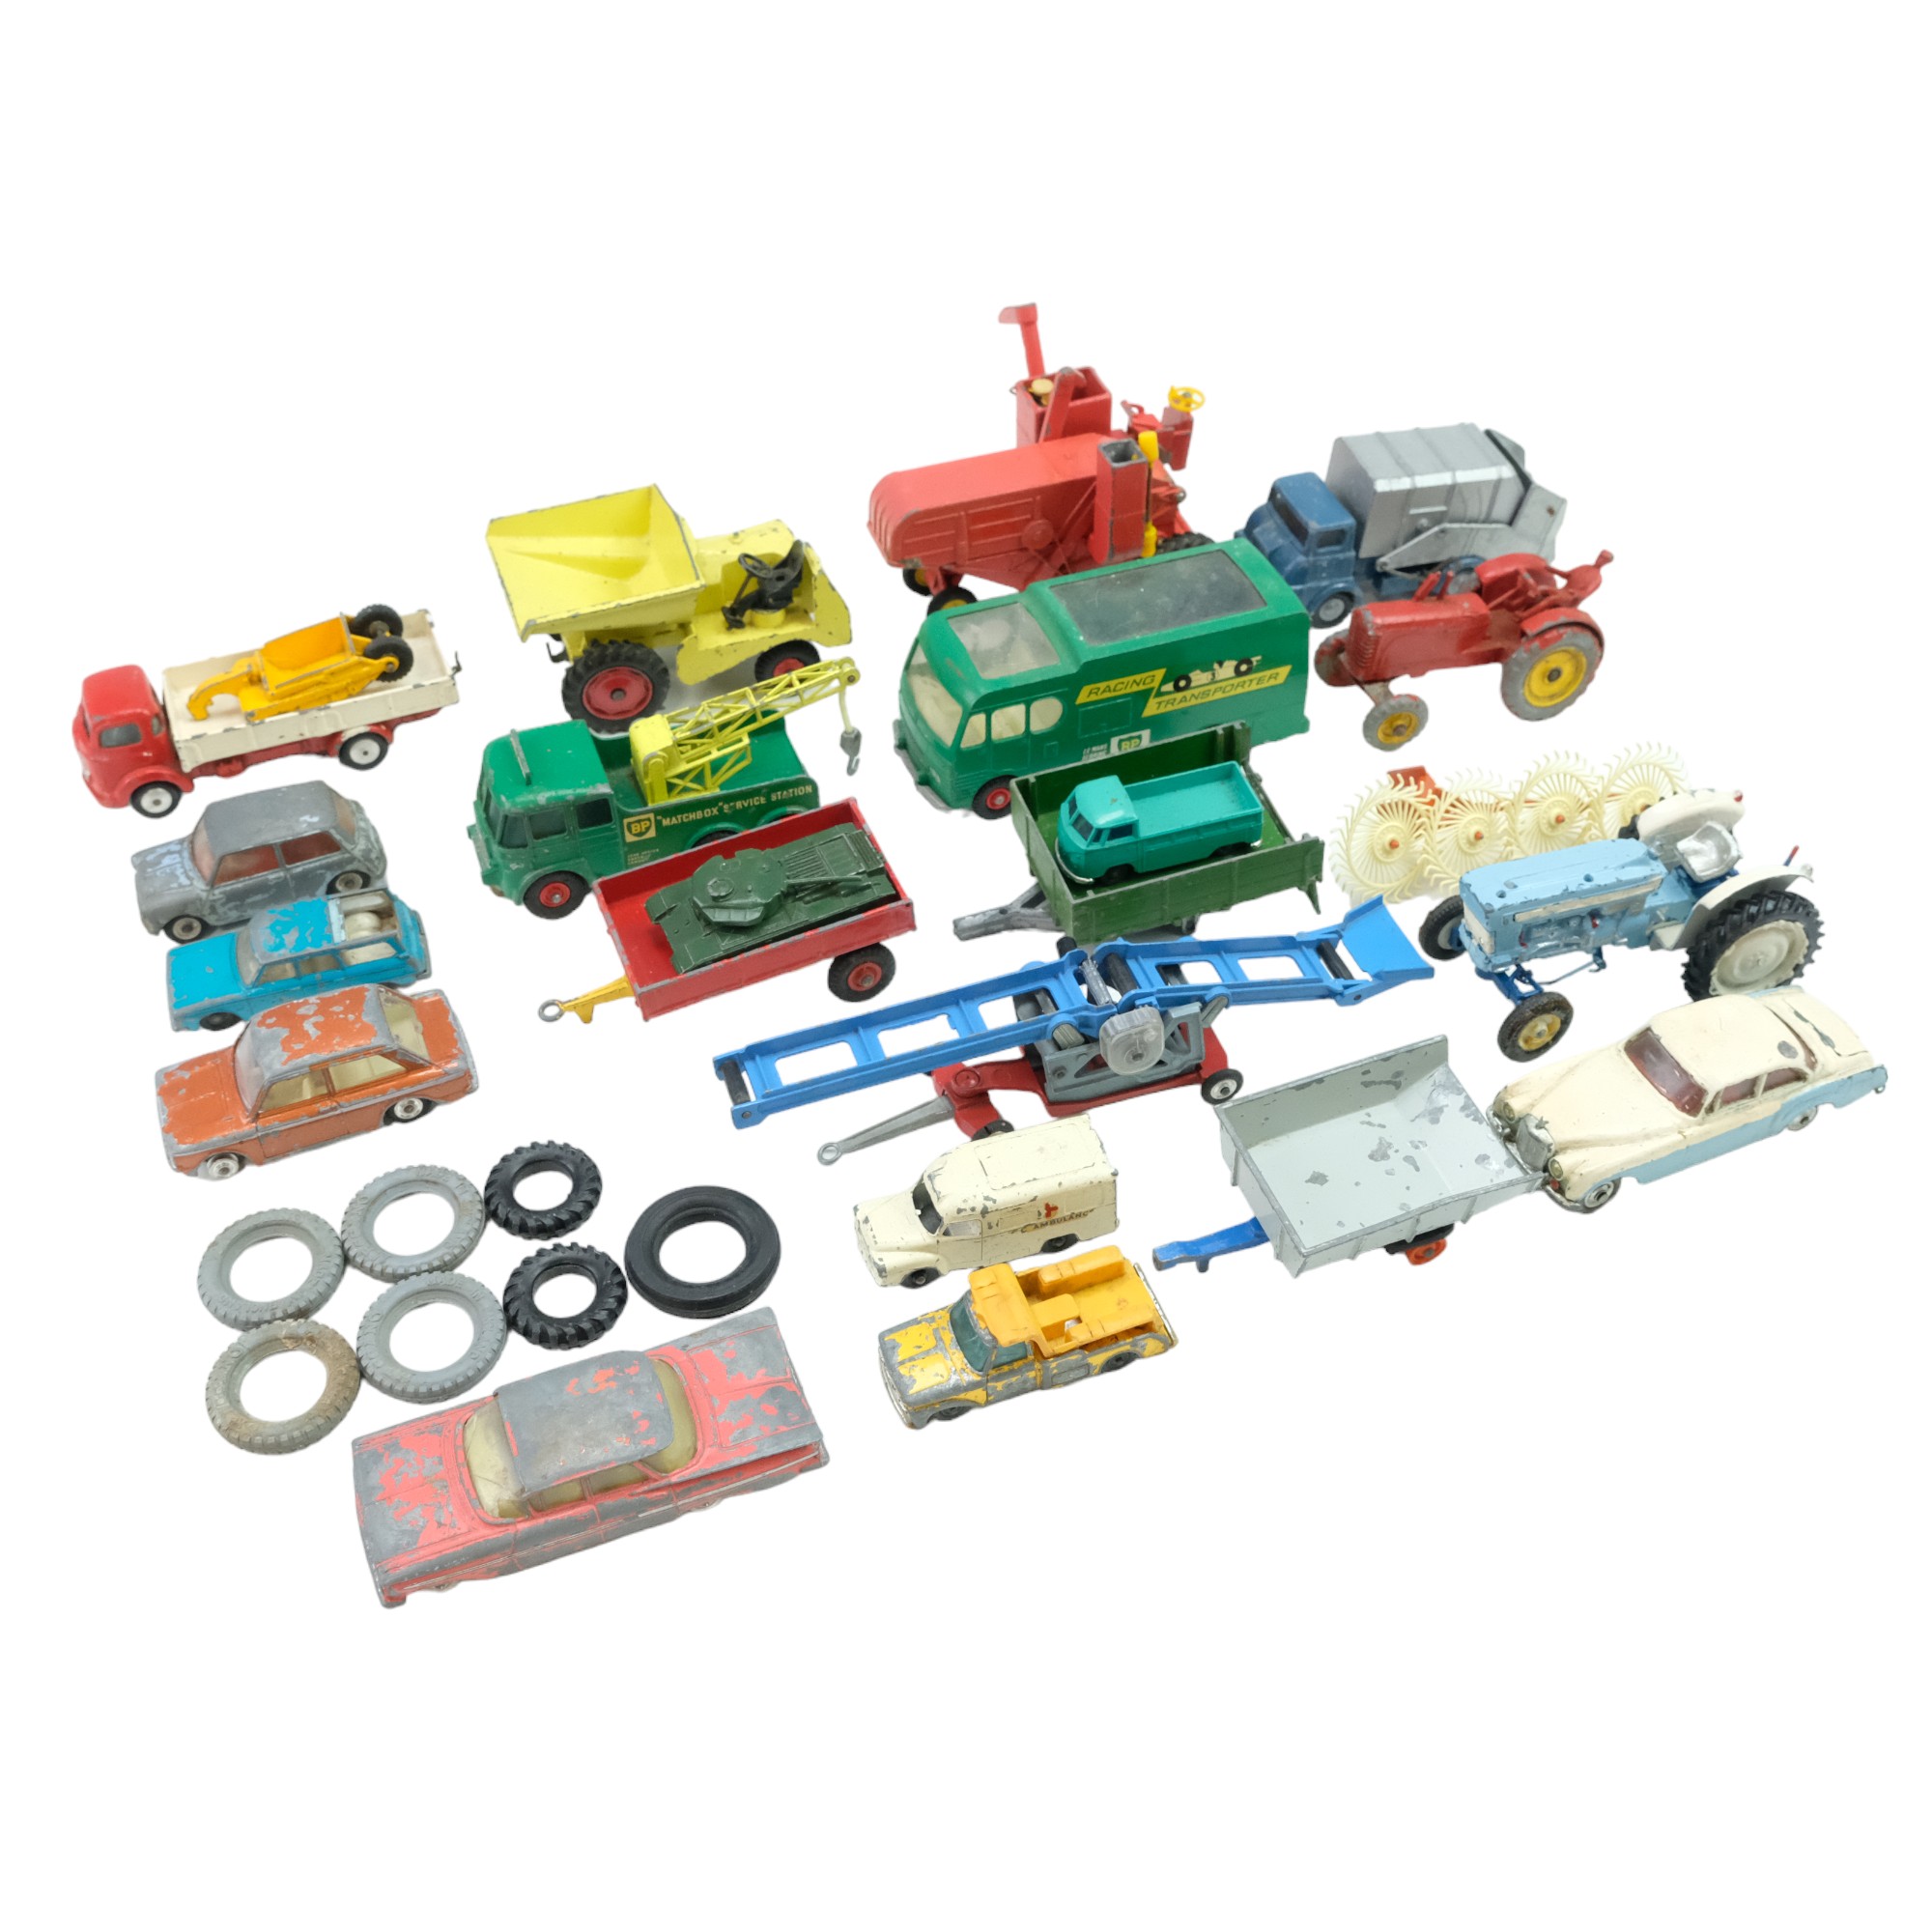 A quantity of Corgi and Matchbox diecast model cars and wagons including a racing transporter and